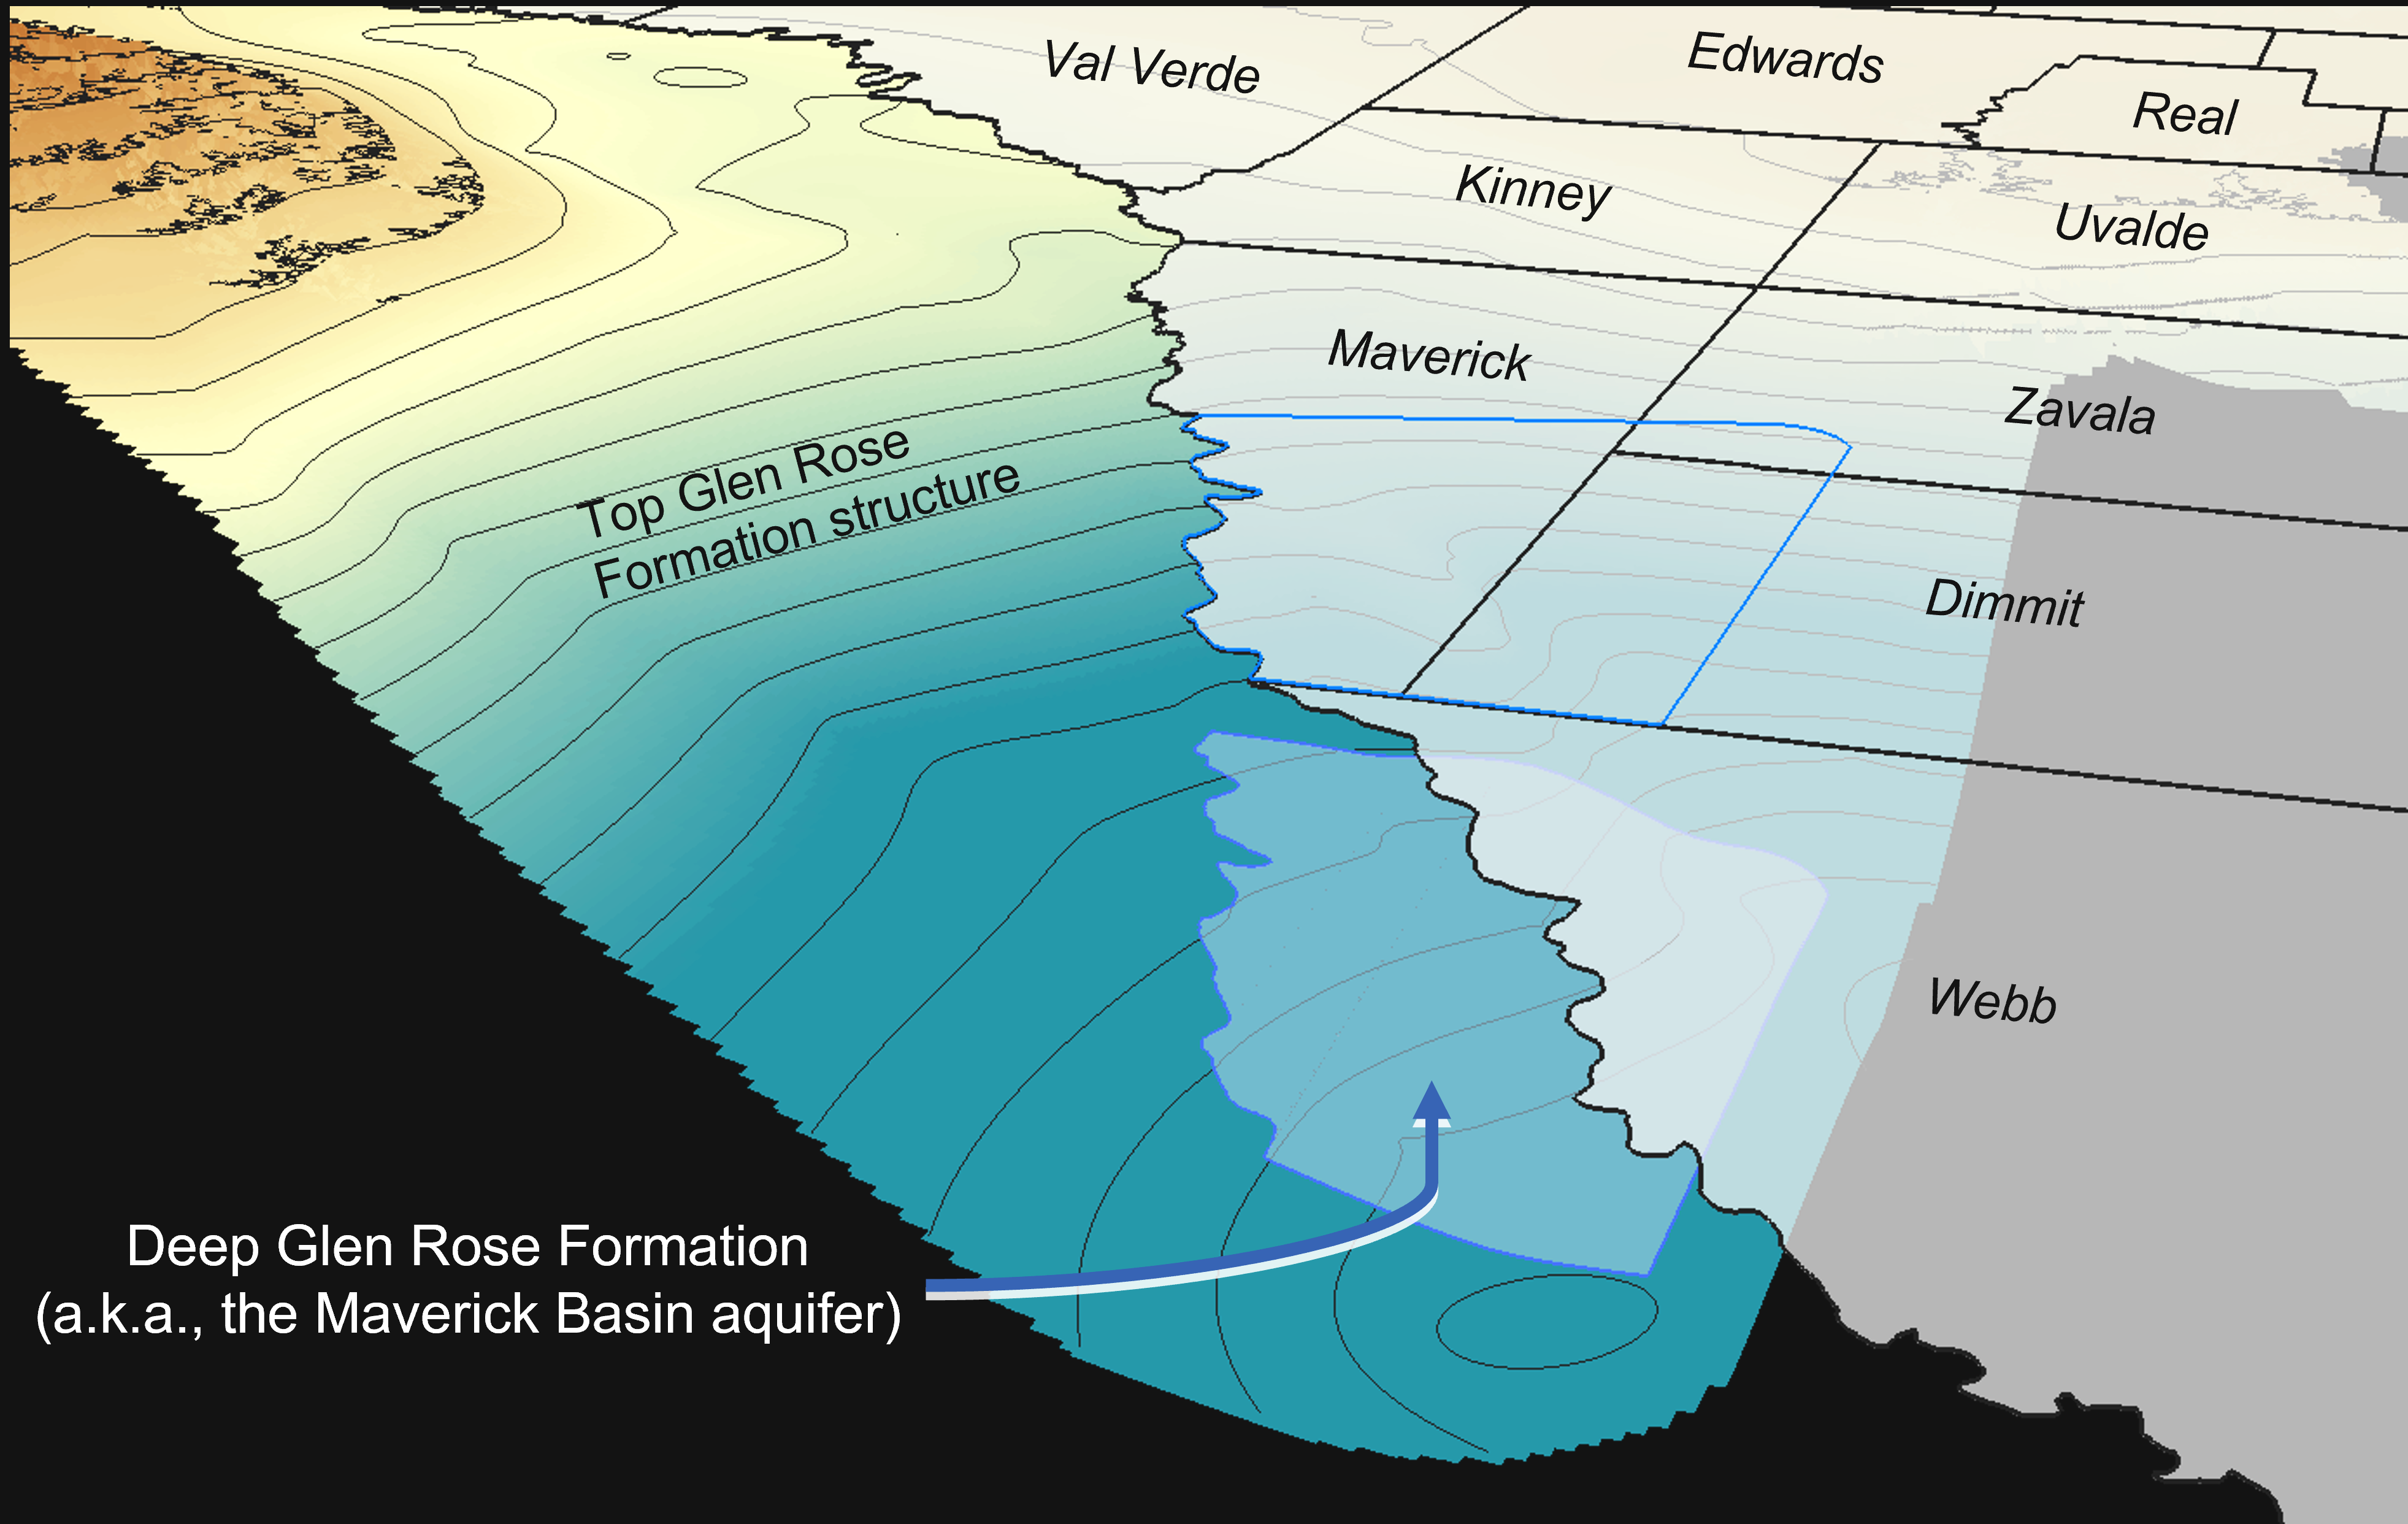 Three dimensional map of the top of the Glen Rose Formation in the Maverick Basin, mapped by the TWDB BRACS department. Image shows Maverick, Zavala, Kinney, Uvalde, and Dimmit counties overlain by a polygon representing a draft extent of the slightly saline water in the Glen Rose Formation, projected into the subsurface to the top of Glen Rose Formation. The figure includes Mexico showing the top of Glen Rose Formation elevated in the Sierra del Burro Mountains west of MAverick County. 